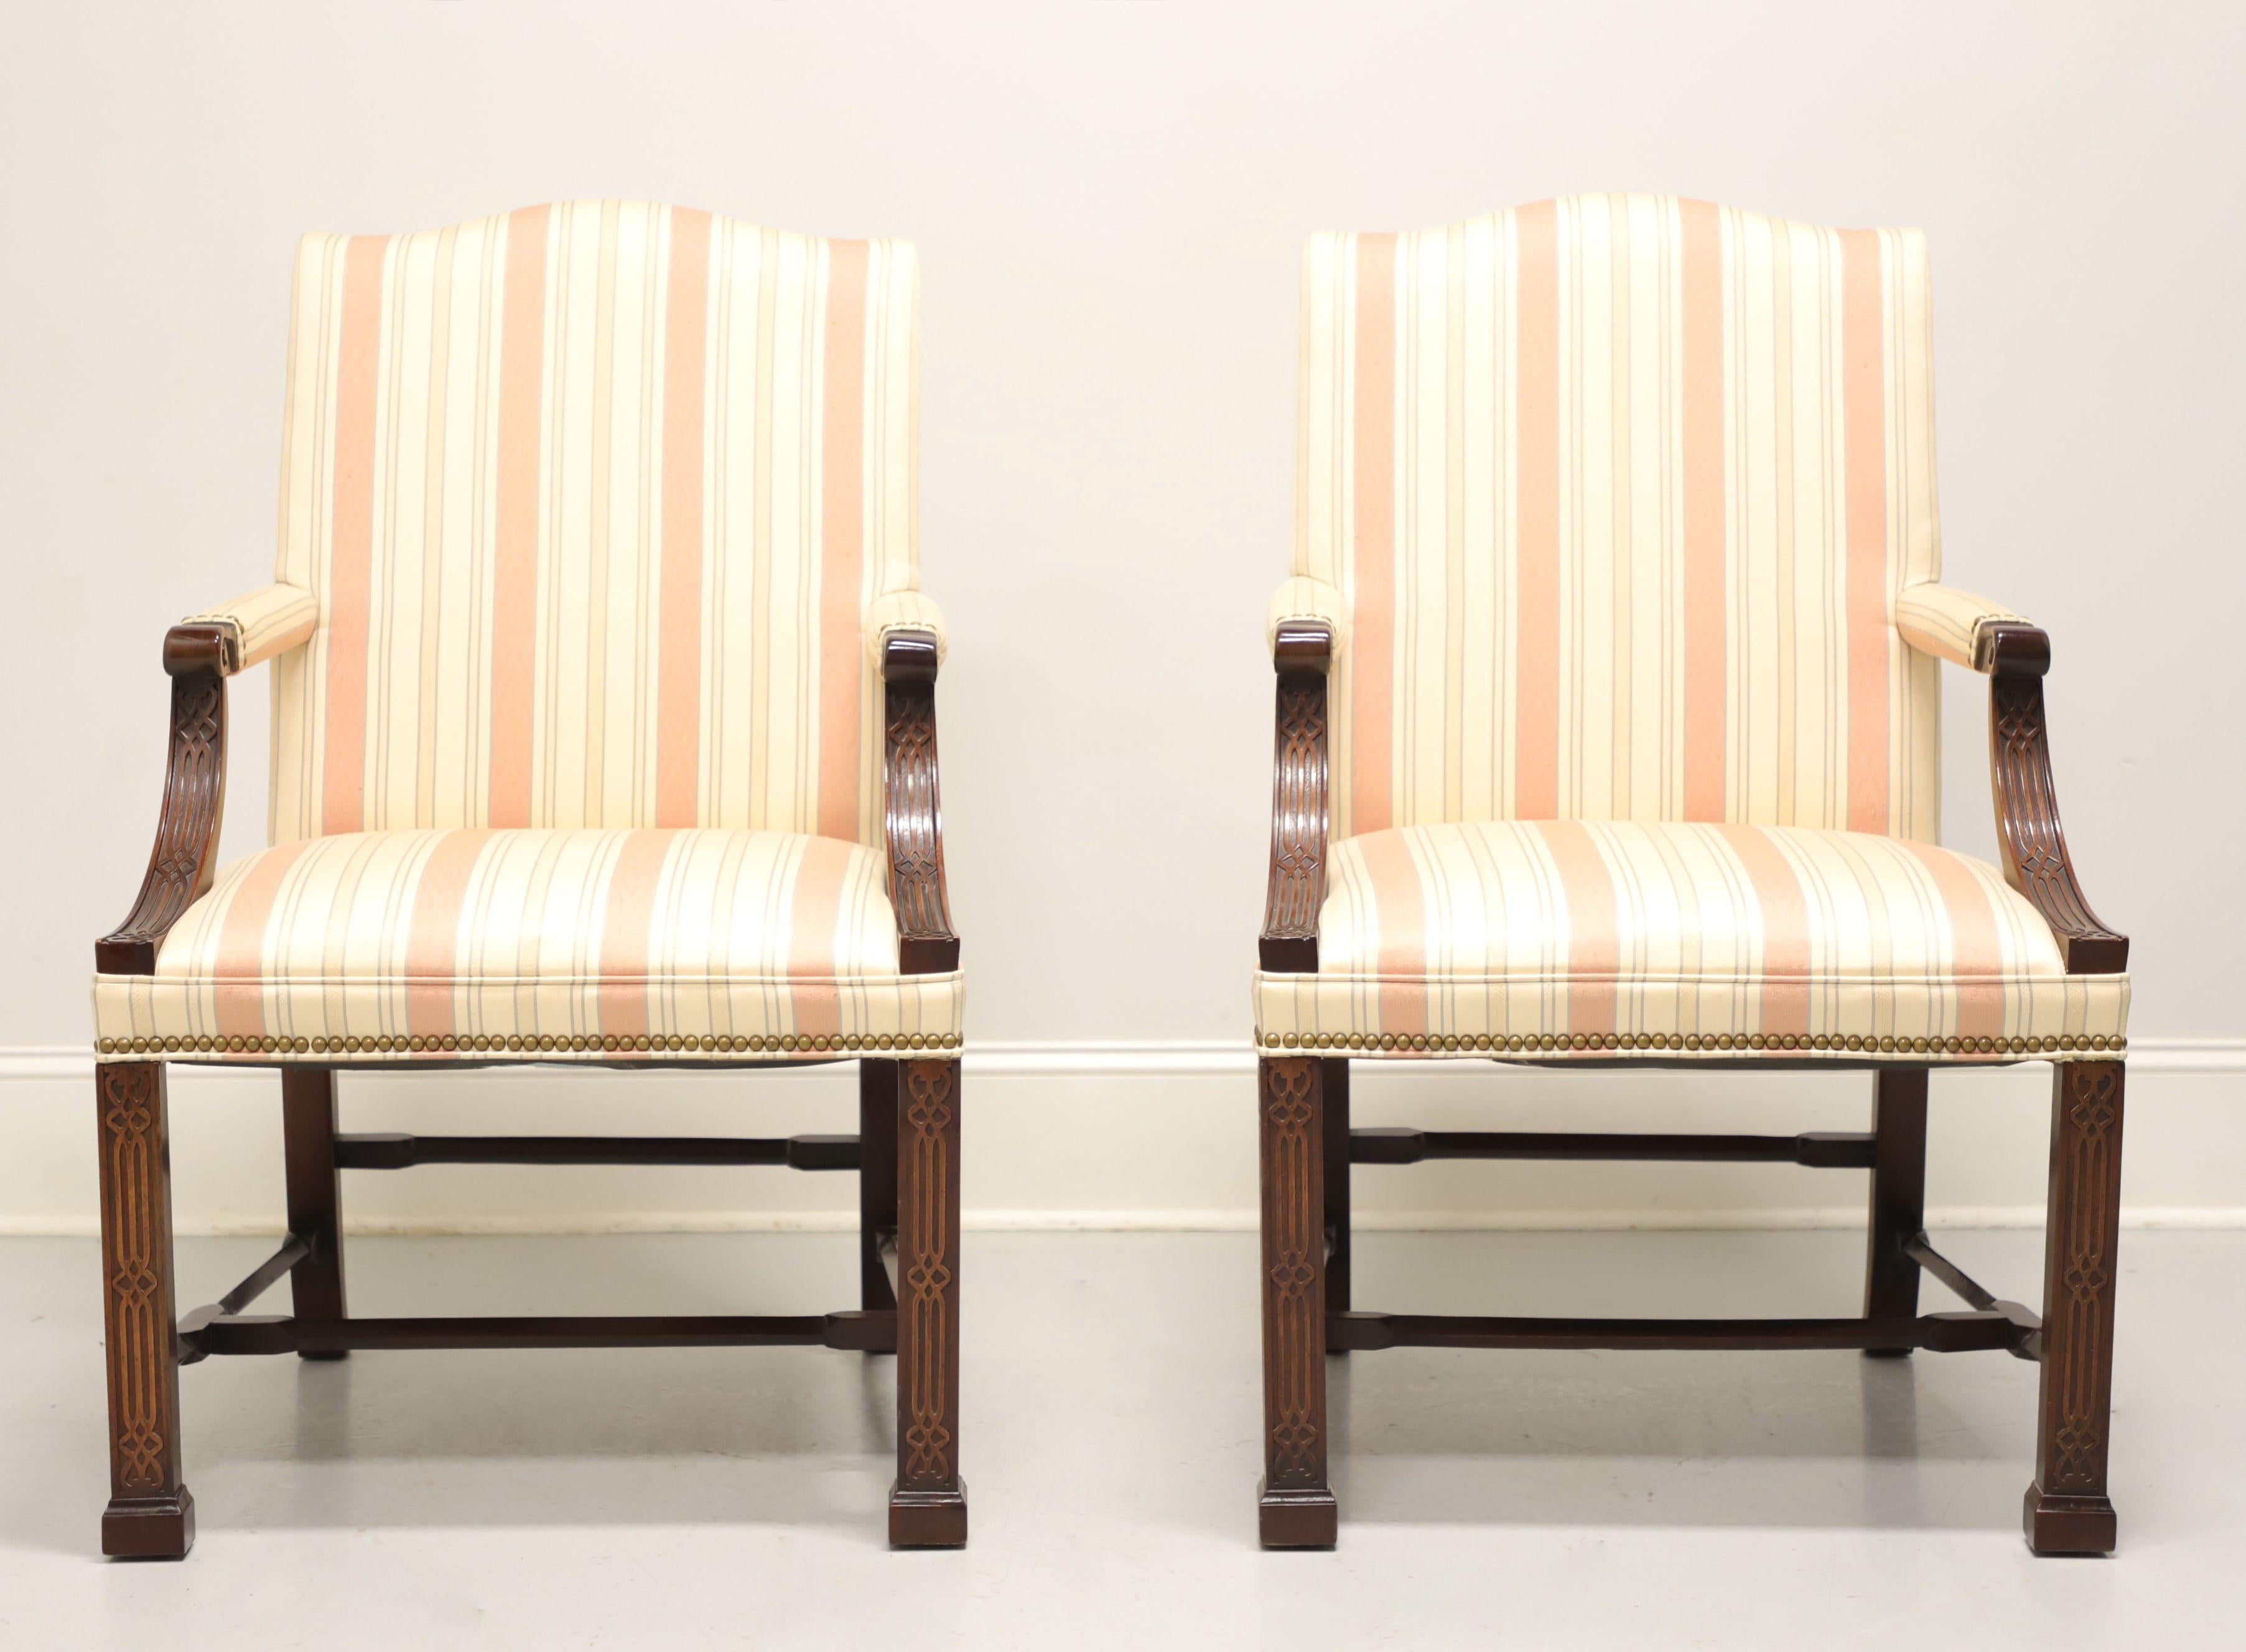 American HICKORY CHAIR Wentworth Mahogany Chippendale Style Fretwork Armchairs - Pair